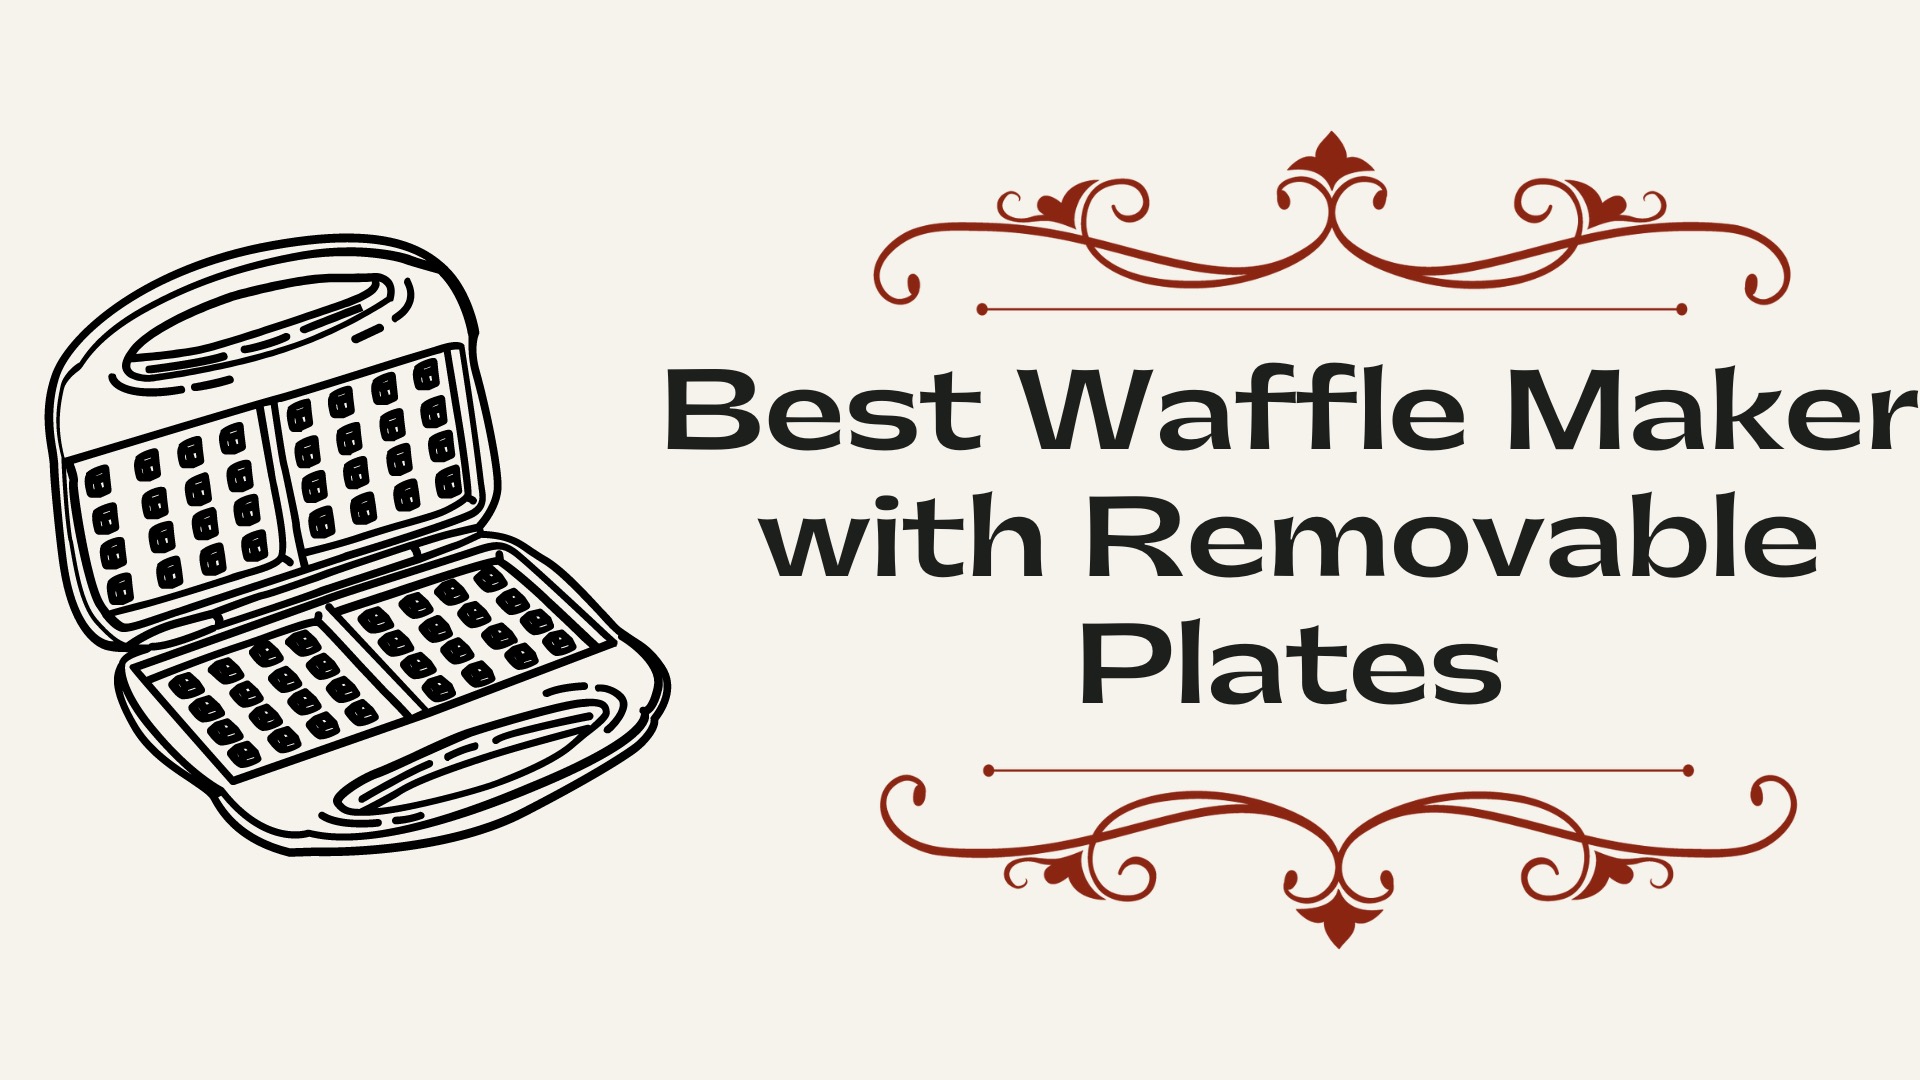 Best Waffle Maker with Removable Plates